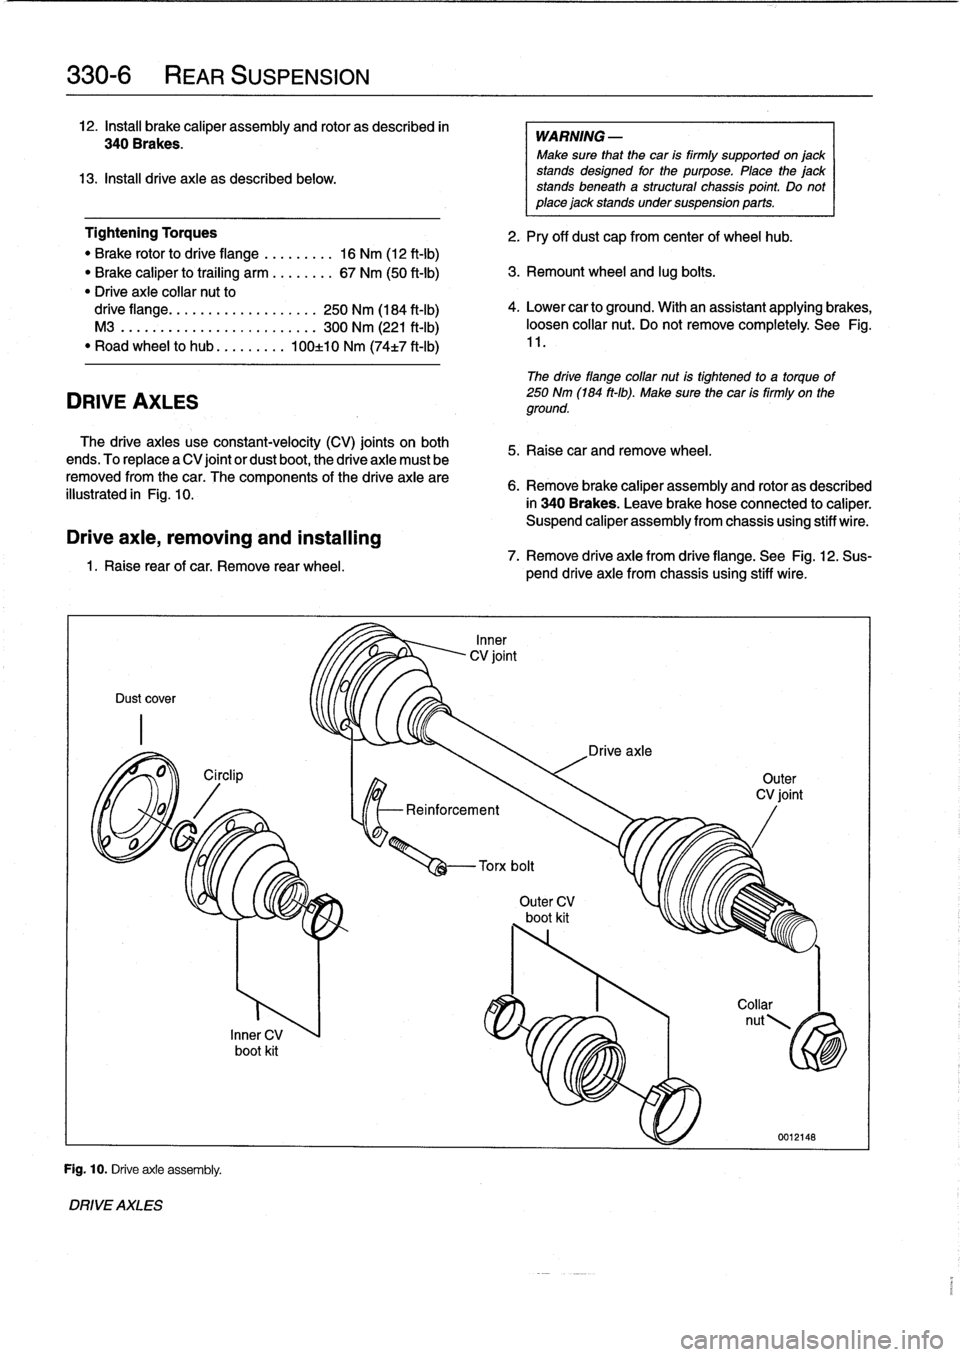 BMW M3 1993 E36 Owners Manual 
330-
6

	

REAR
SUSPENSION

12
.
Install
brake
caliper
assembly
and
rotor
as
described
in

340Brakes
.

13
.
Install
drive
axie
as
described
below
.

Tightening
Torques

"
Brake
rotor
to
drive
flange